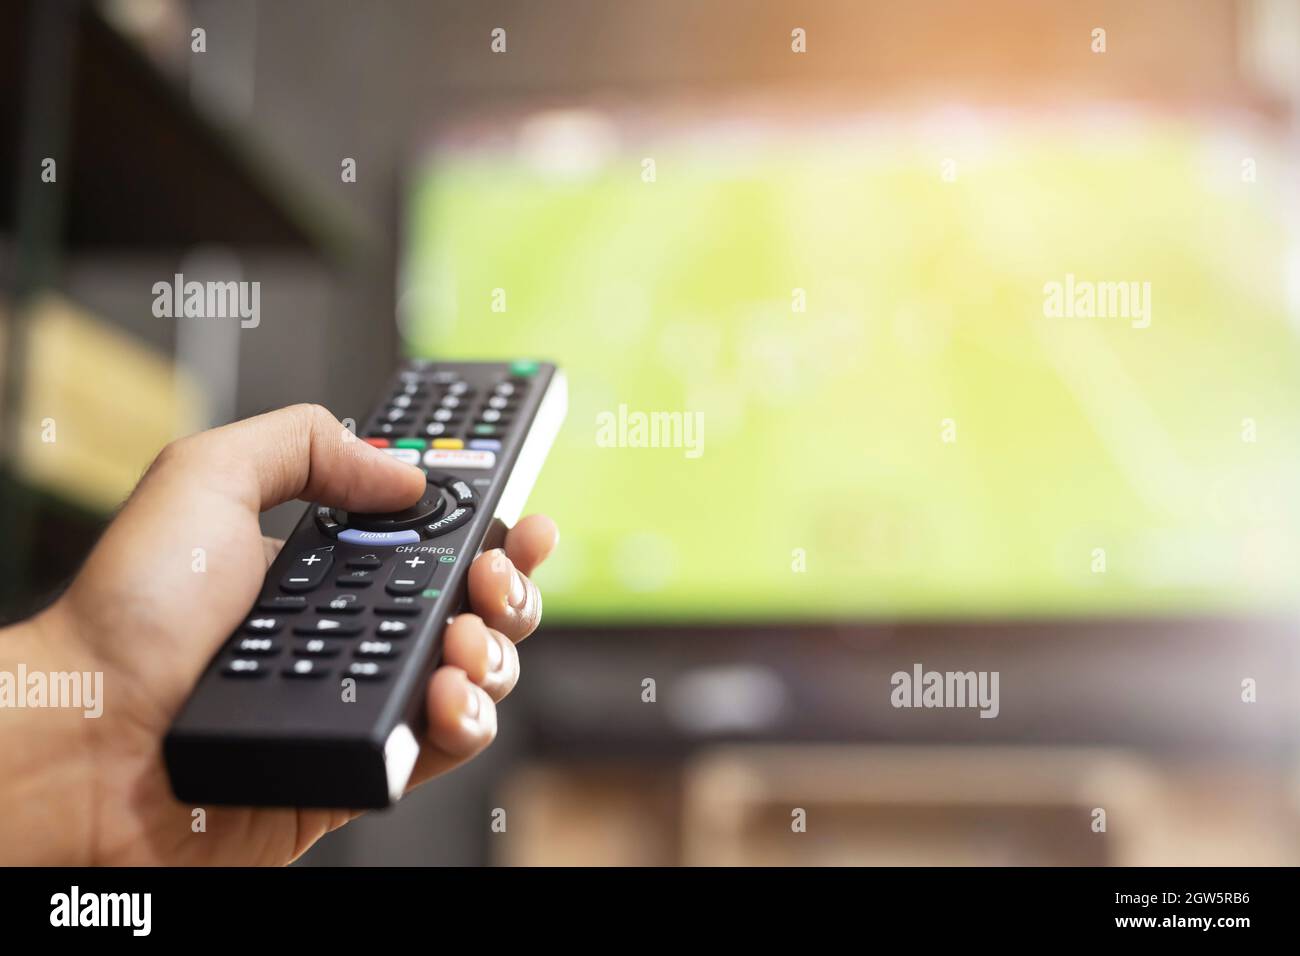 Tv Remote For Watching Movies Online Stock Photo